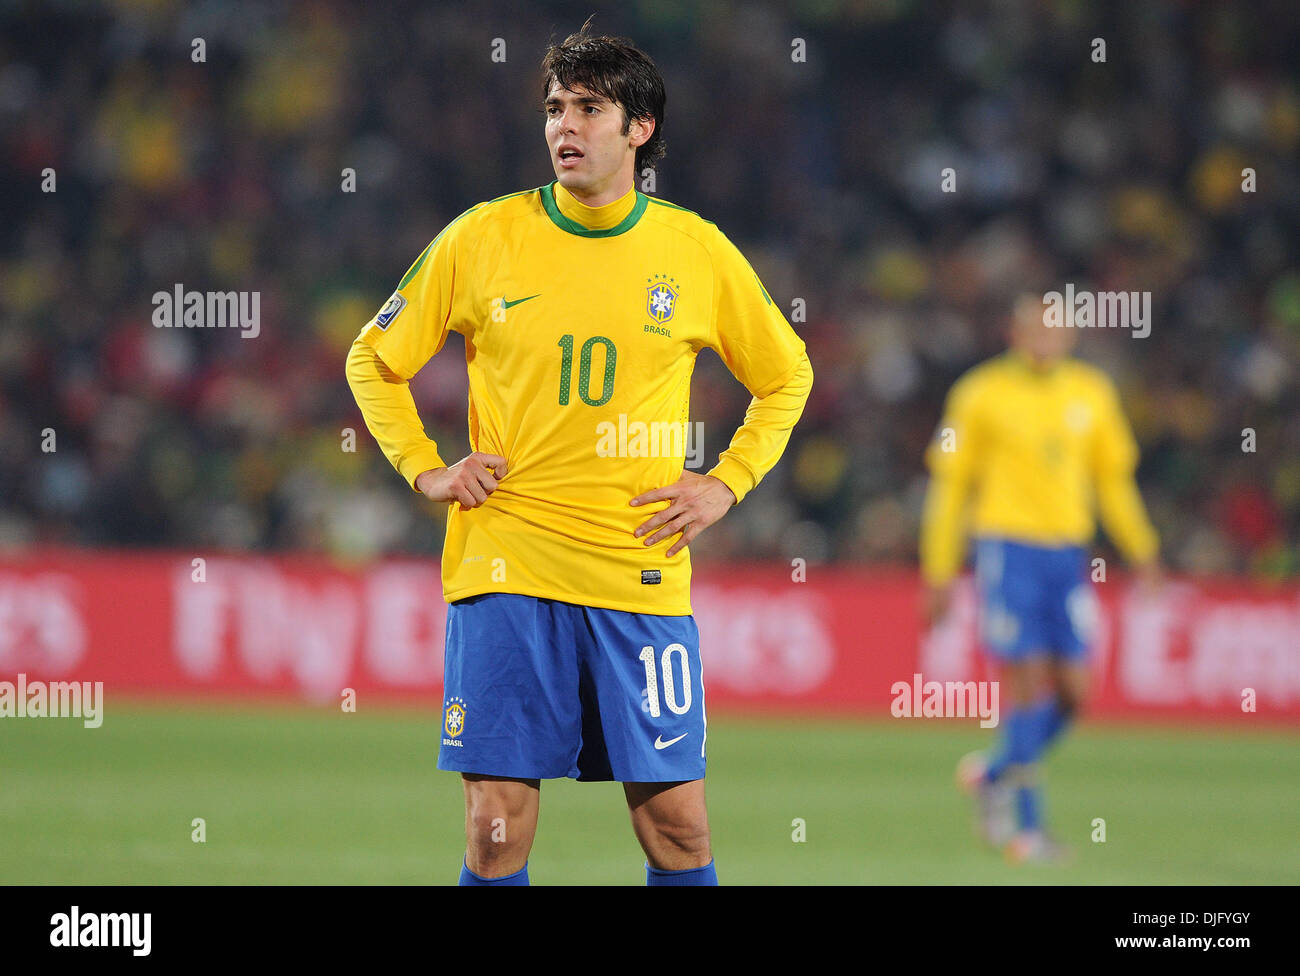 June 28, 2010 - Johannesburg, South Africa - Kaka of Brazil is seen during the 2010 FIFA World Cup soccer match between Brazil and Chile at Ellis Park Stadium on June 28, 2010 in Johannesburg, South Africa. (Credit Image: © Luca Ghidoni/ZUMApress.com) Stock Photo